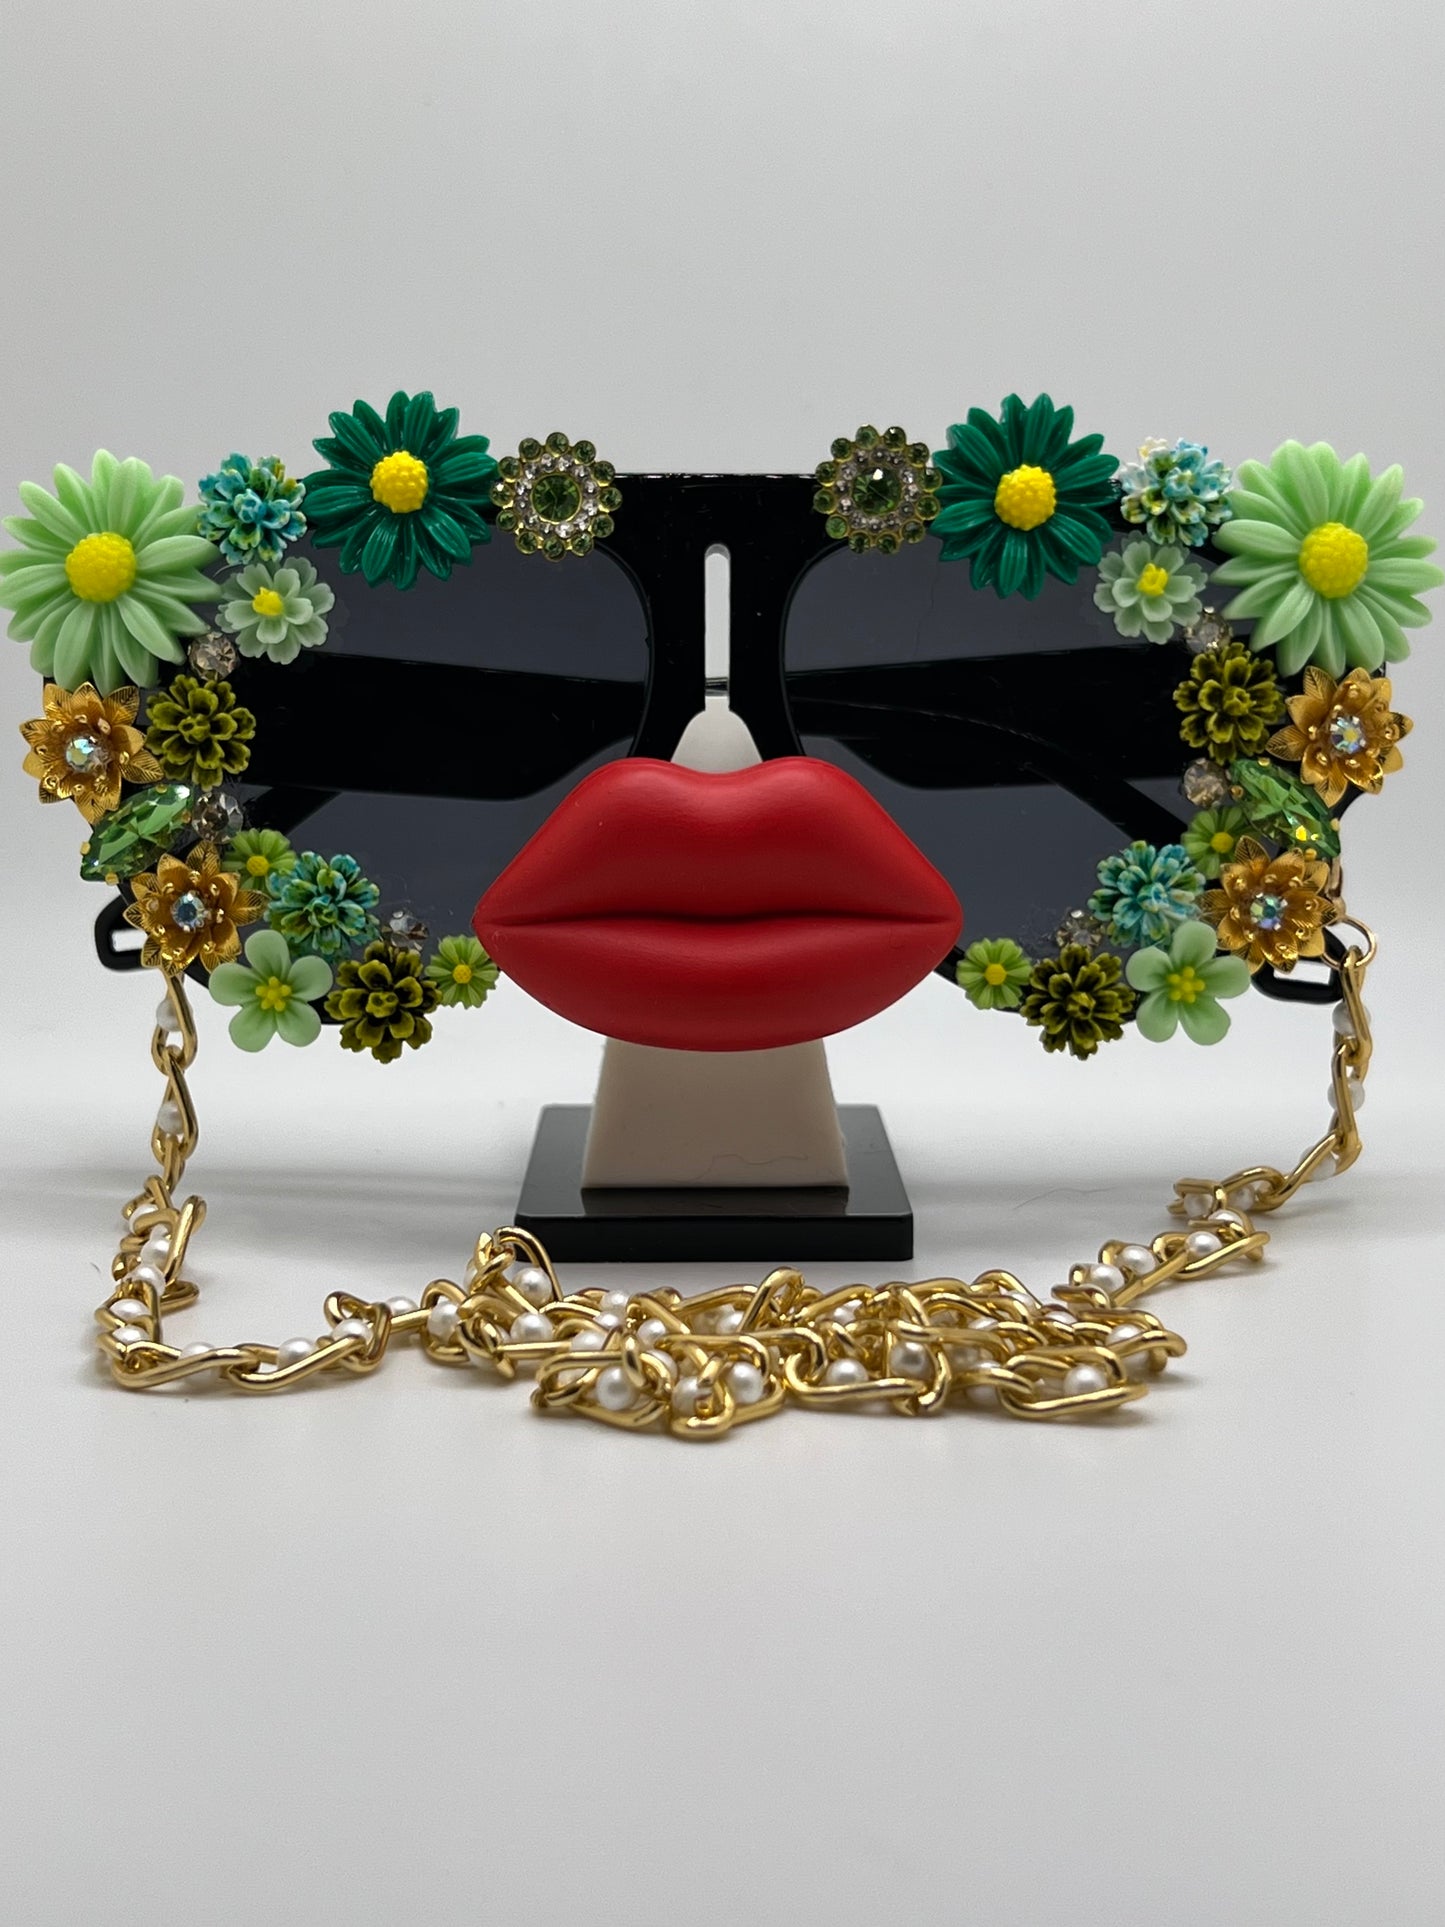 These oversized aviators are surrounded by hues of green and gold flowers and come with a removable gold chain.